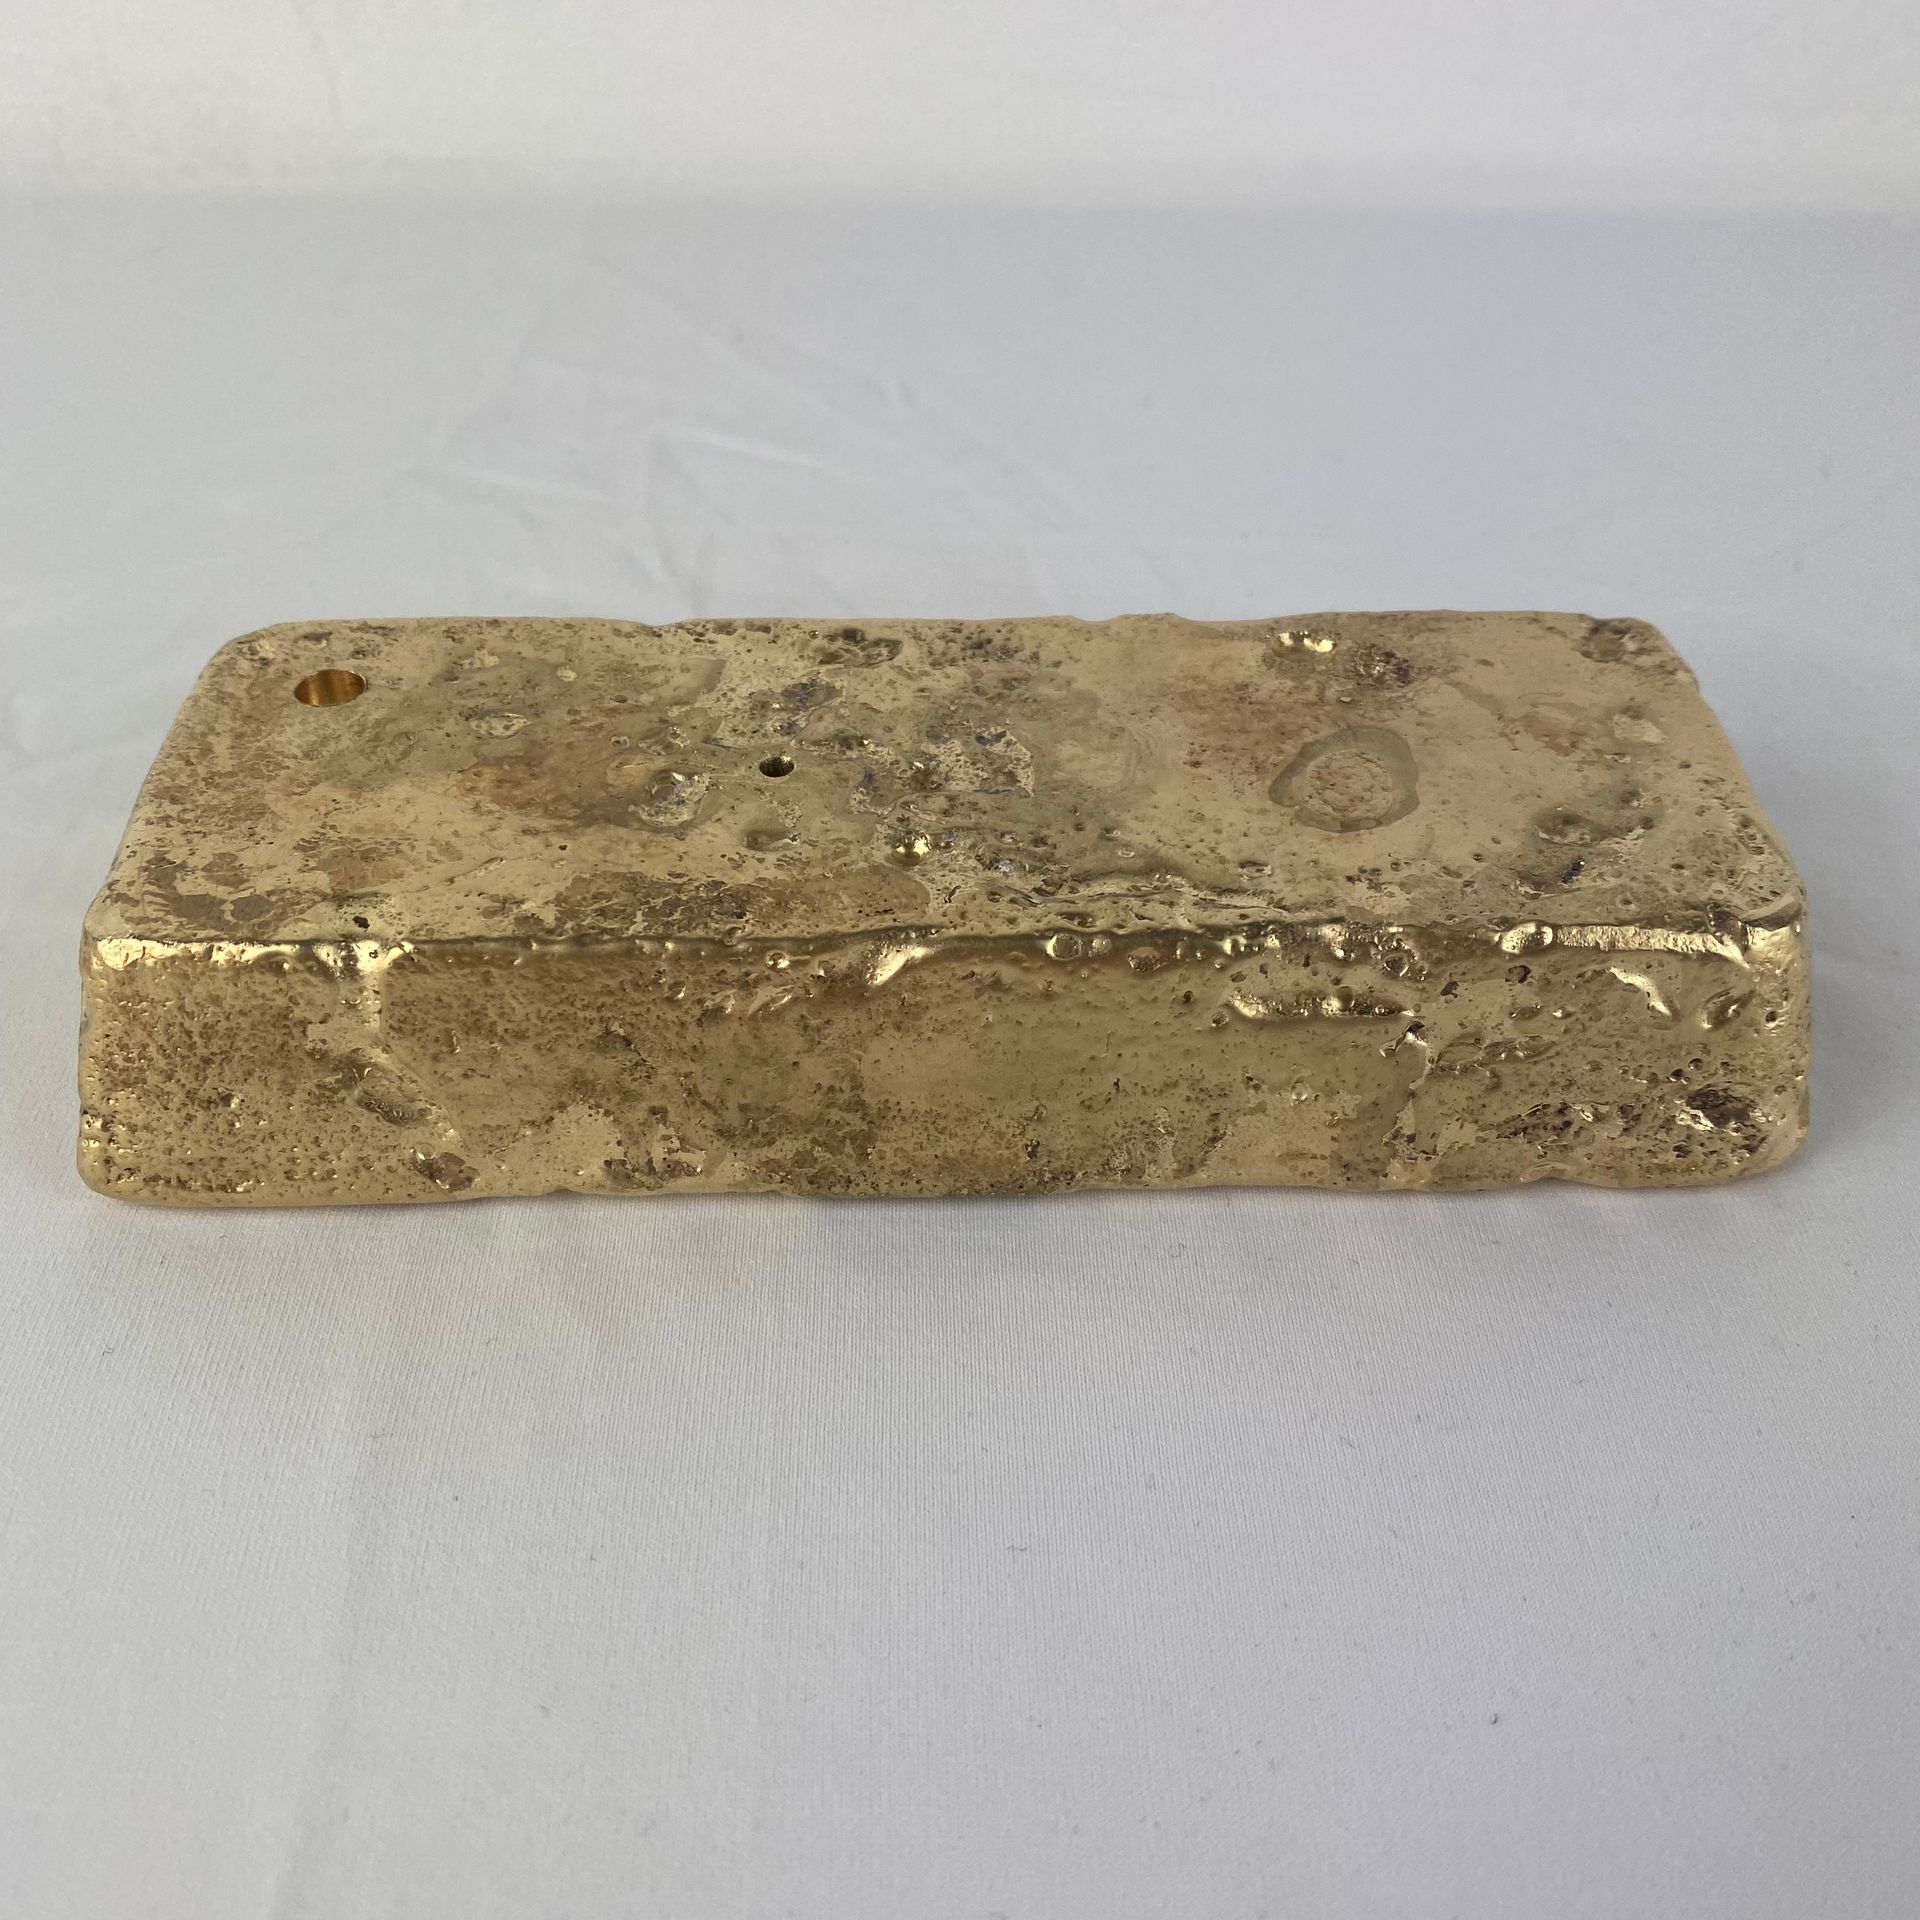 LINGO OR One 9-14ct gold bar of two thousand six hundred and forty (2640) grams.